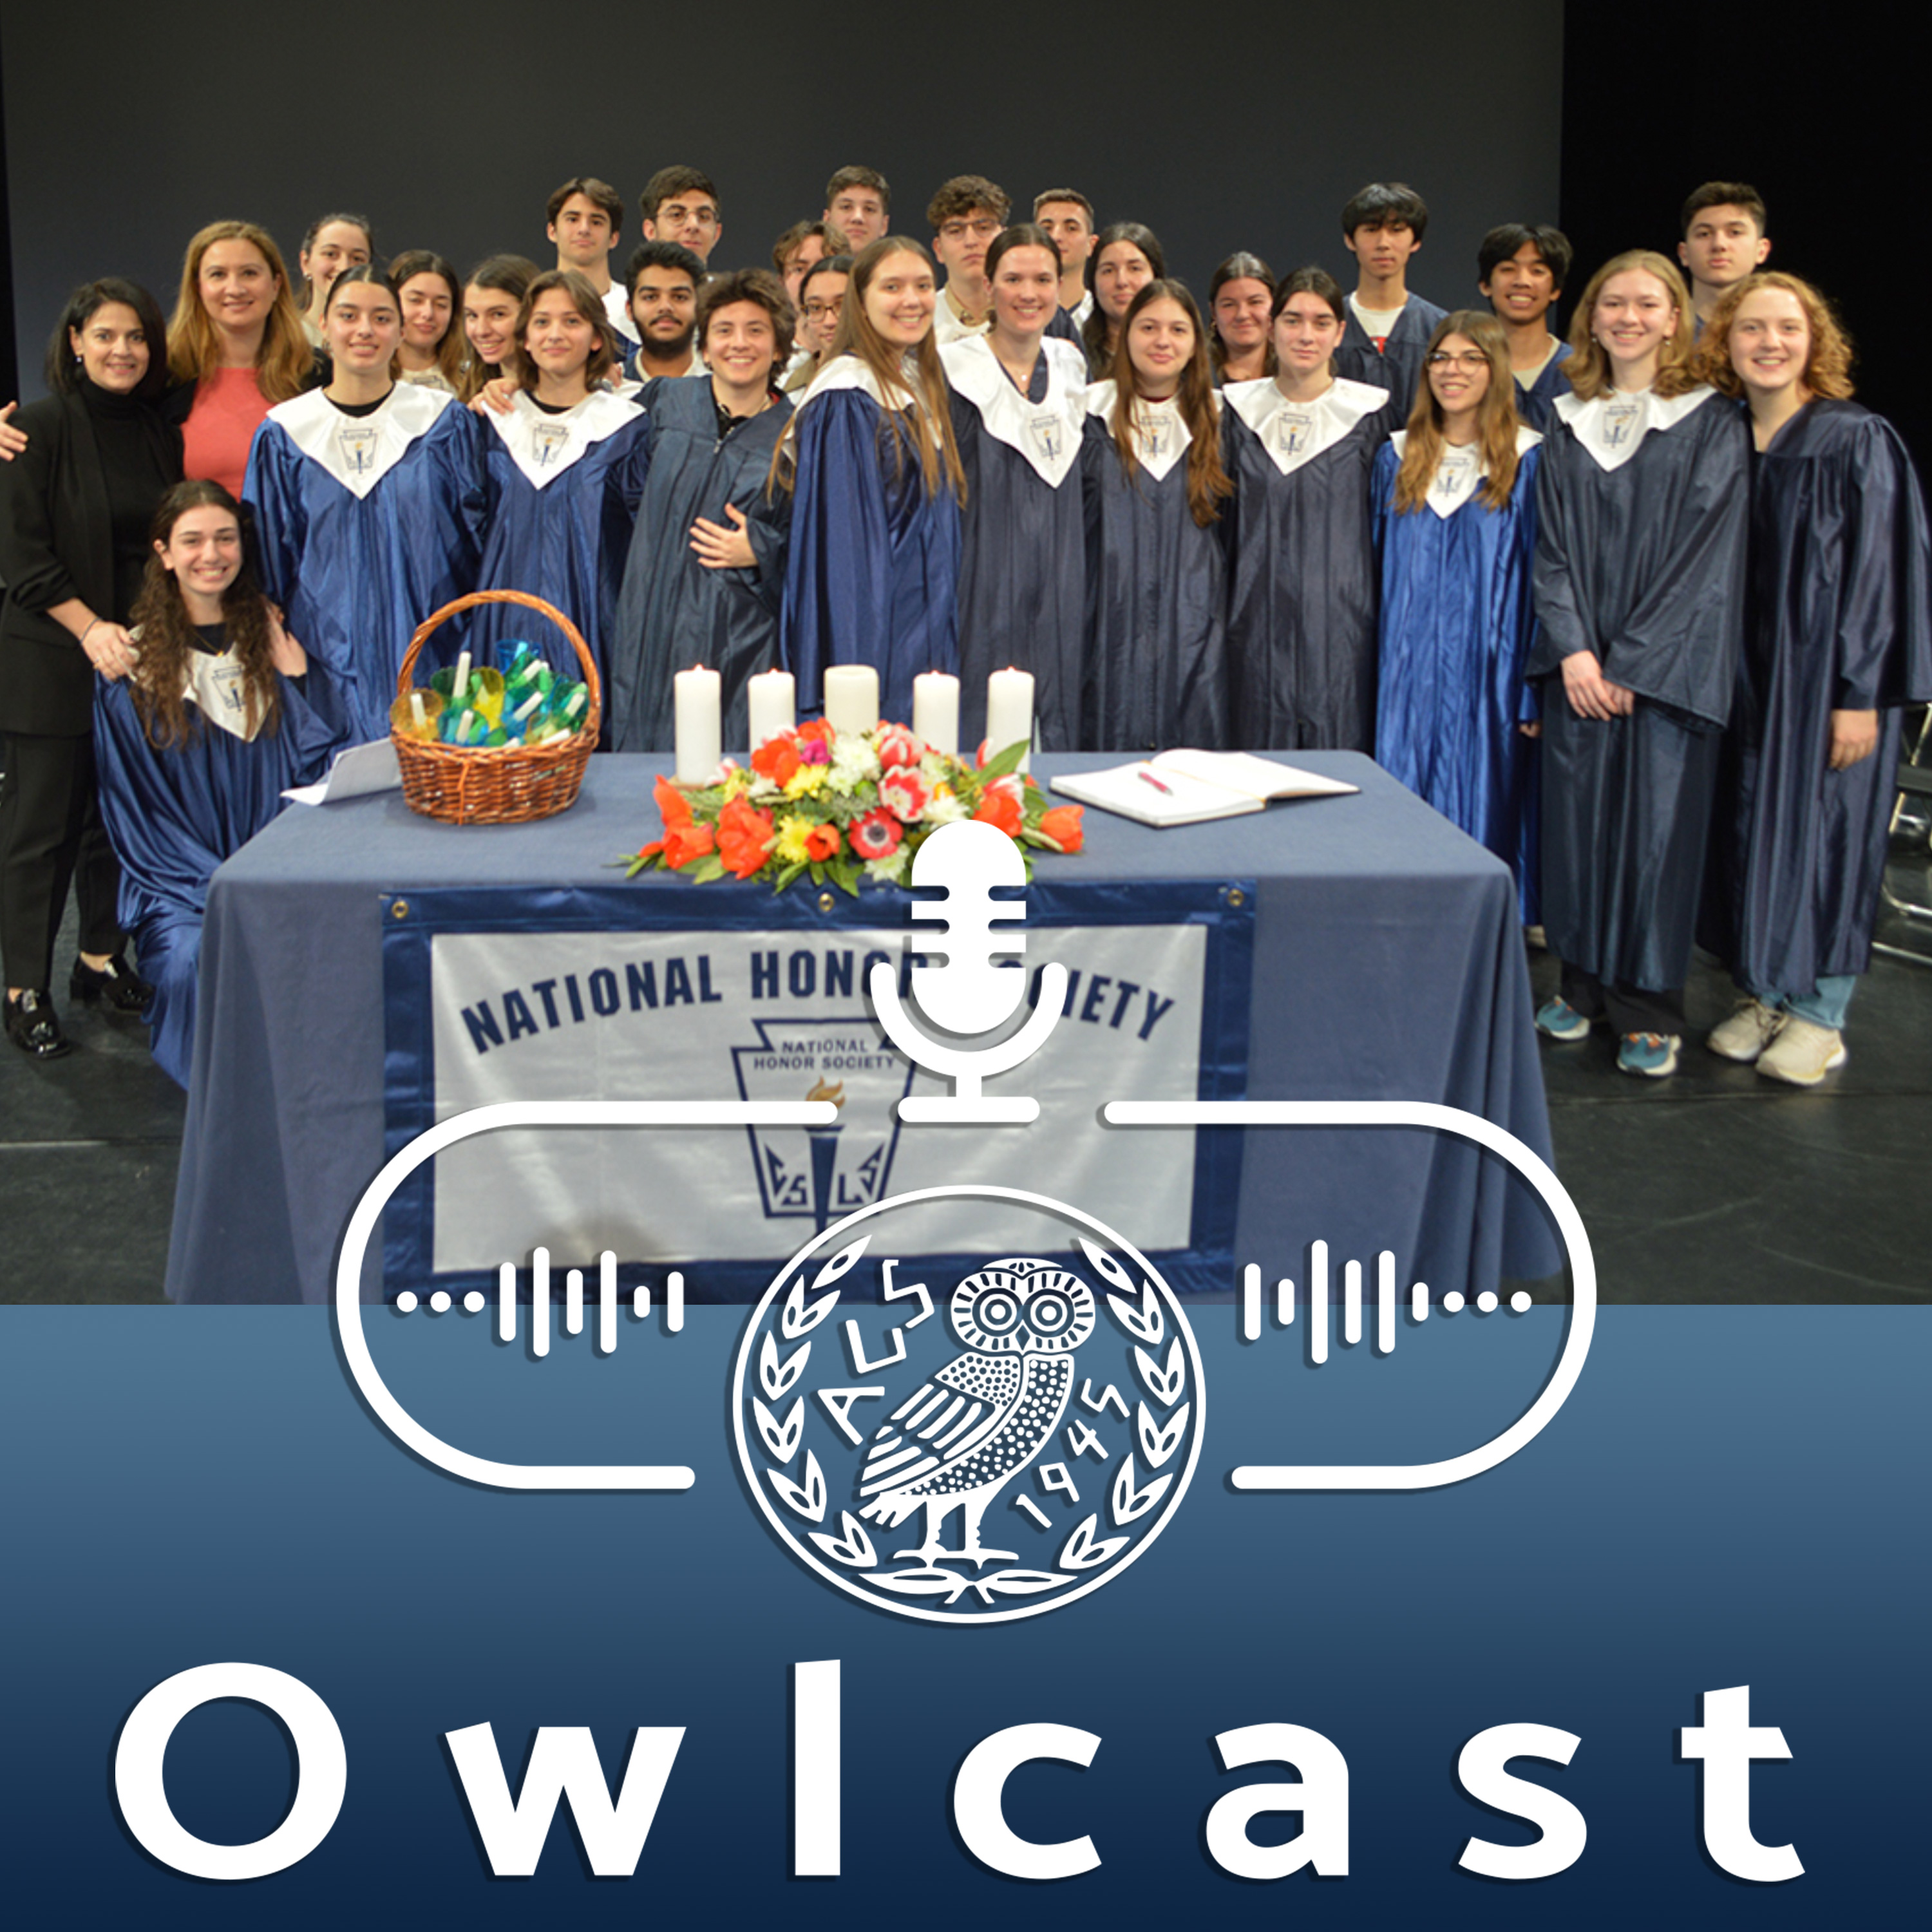 Owlcast 87 - The National Honor Society Experience